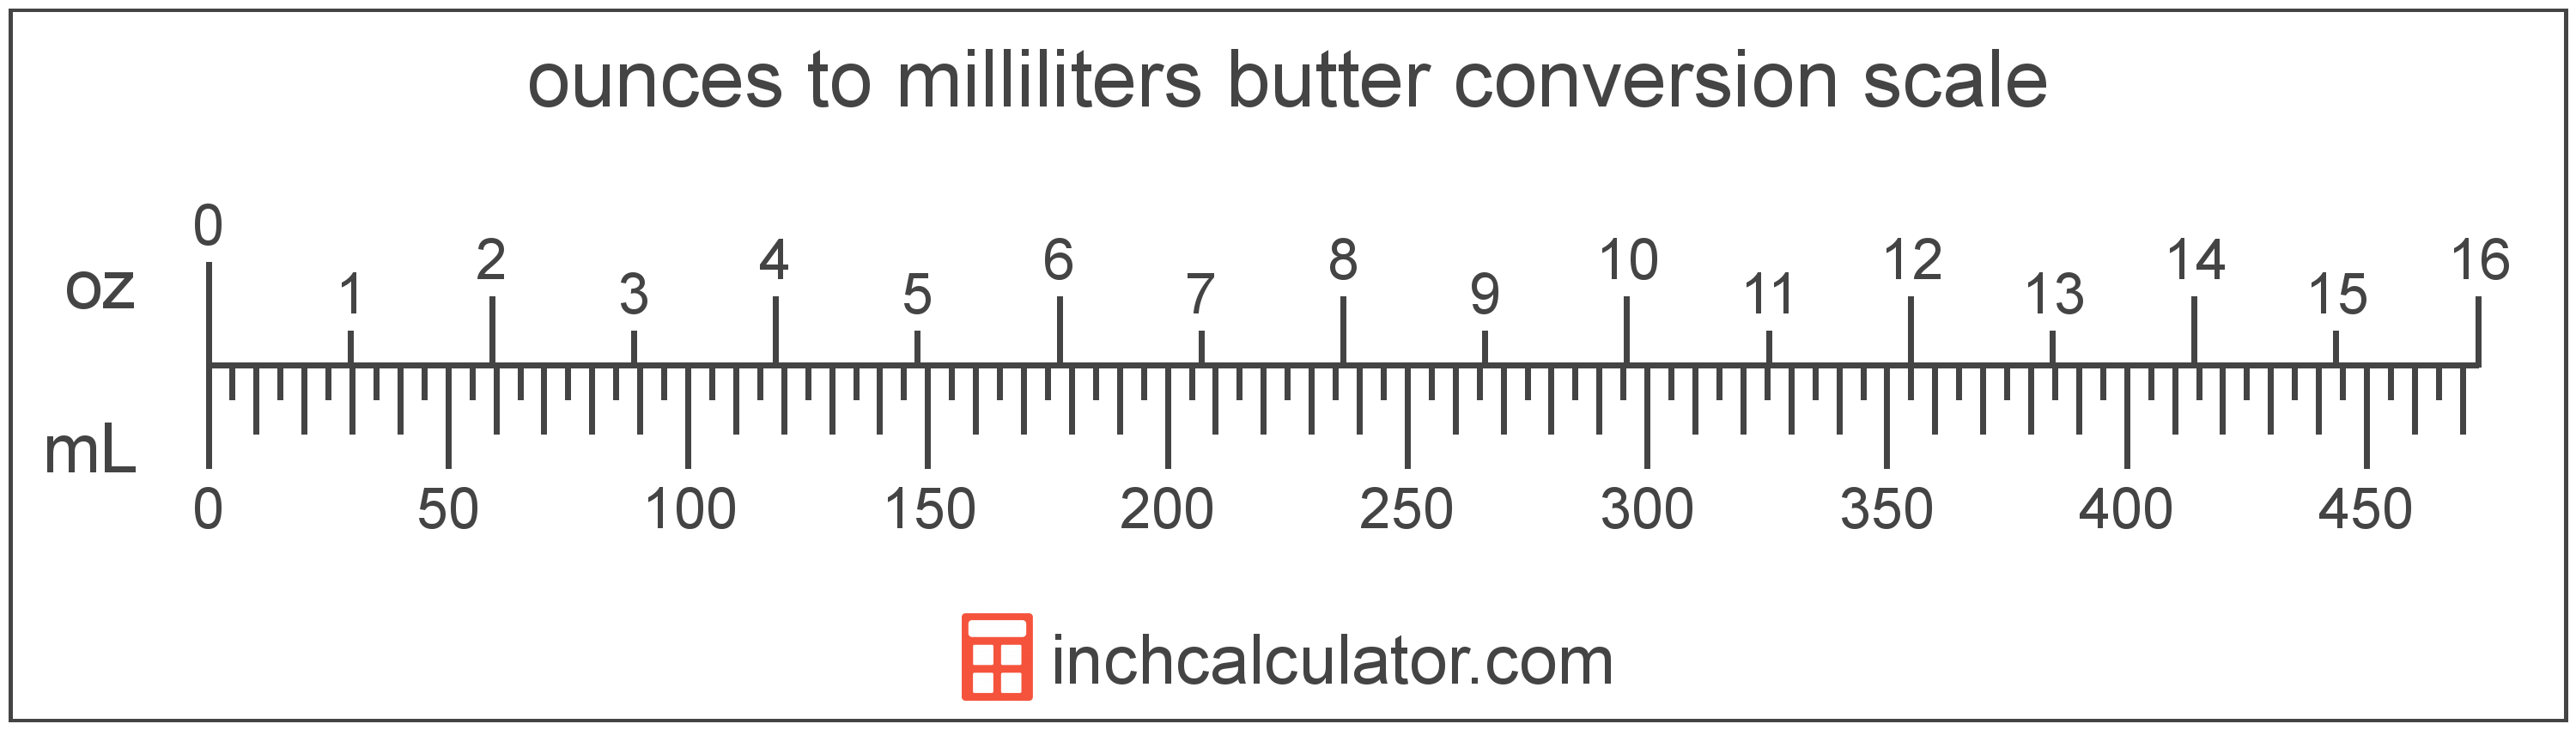 conversion scale showing ounces and equivalent milliliters butter values